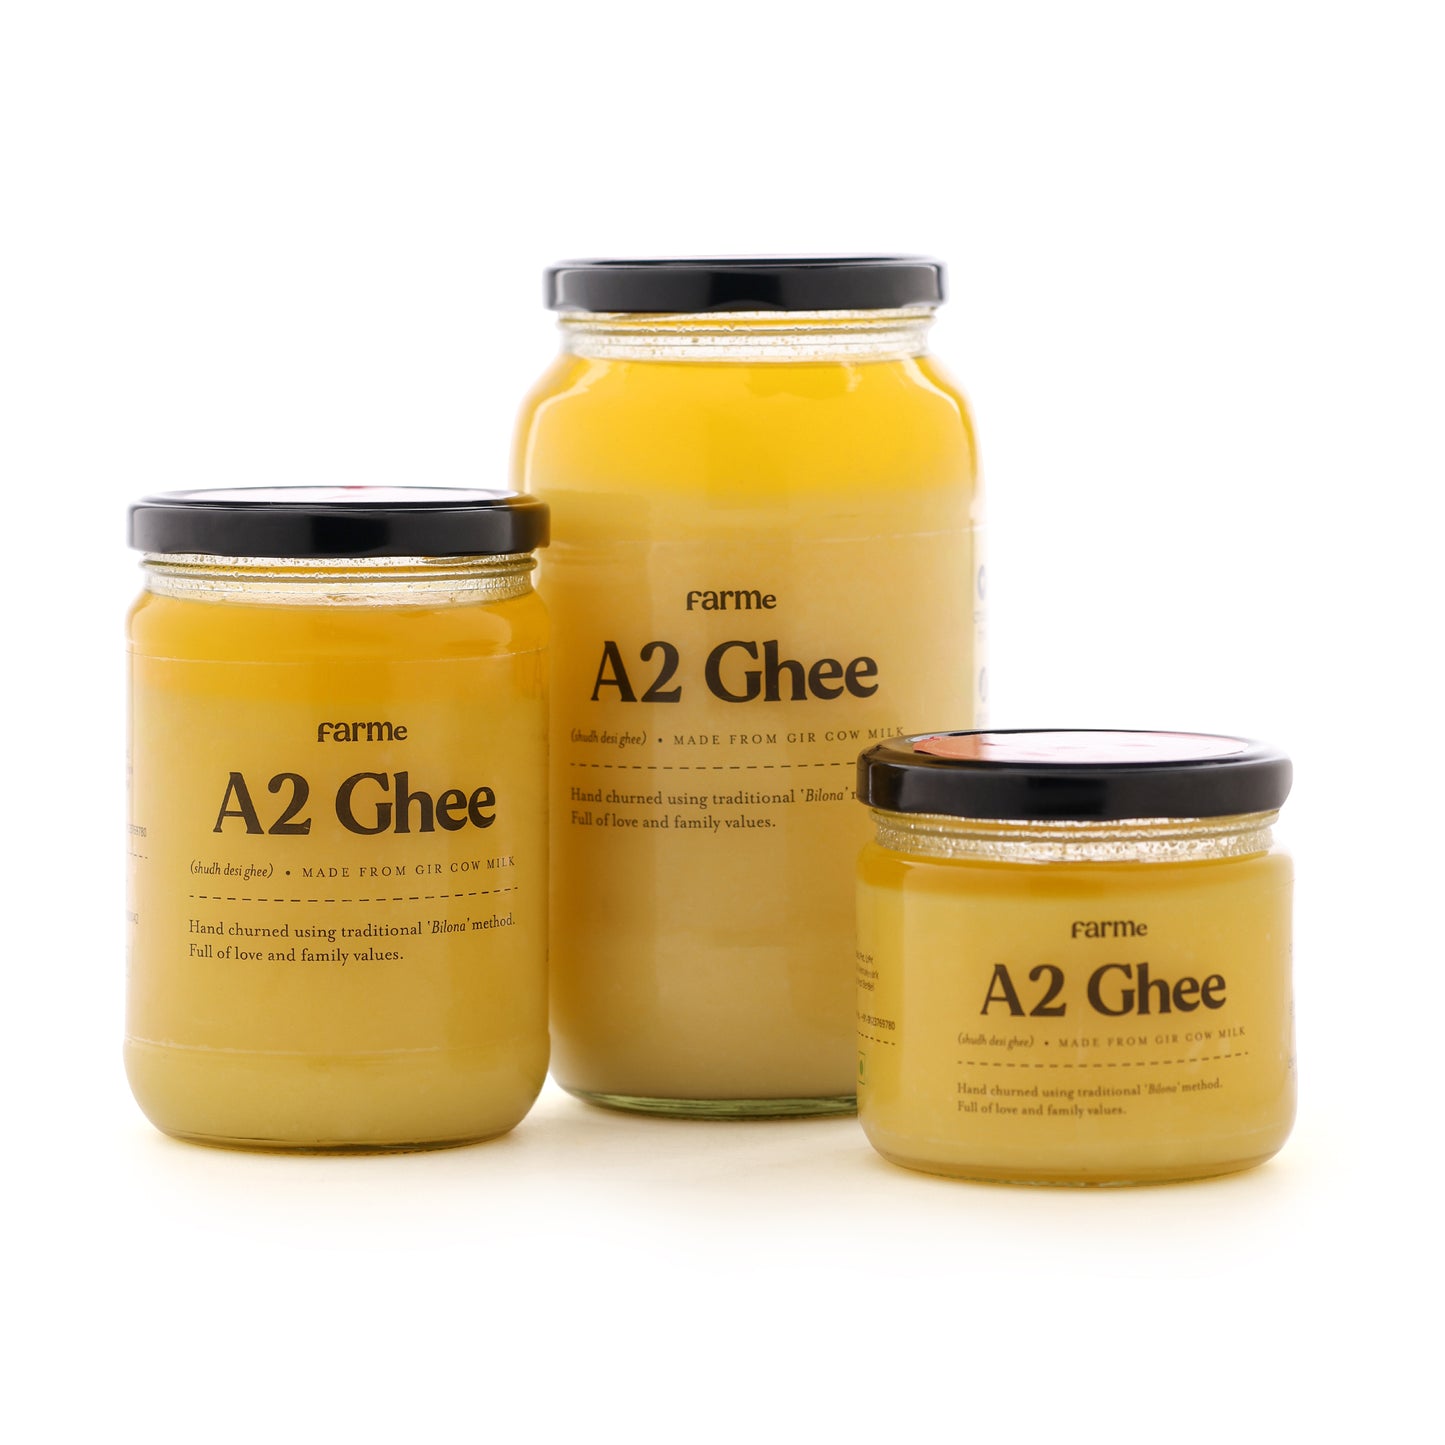 Premium A2 Ghee - Farme | Pure, Handcrafted Goodness